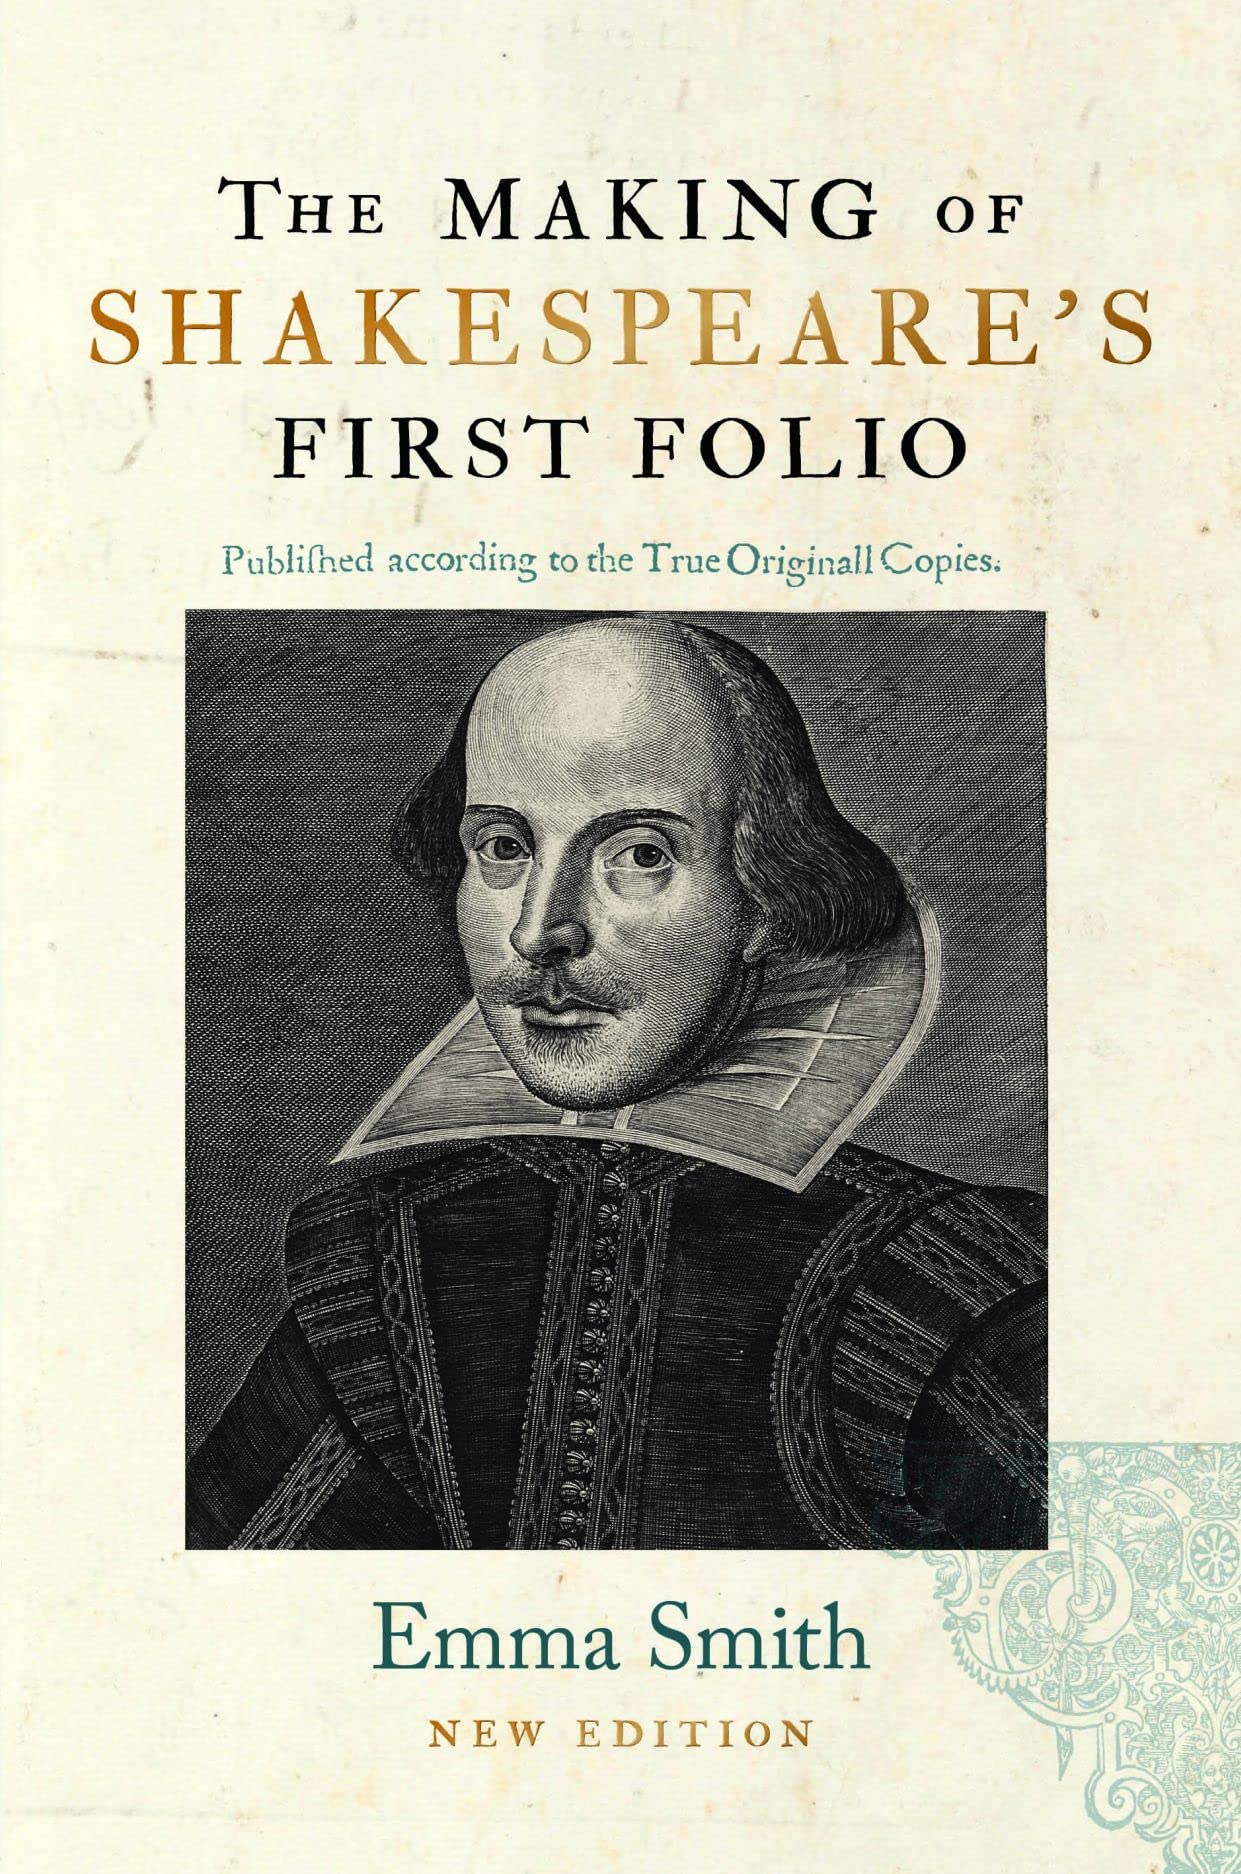 The Making of Shakespeare's First Folio by Emma Smith - hardcvr